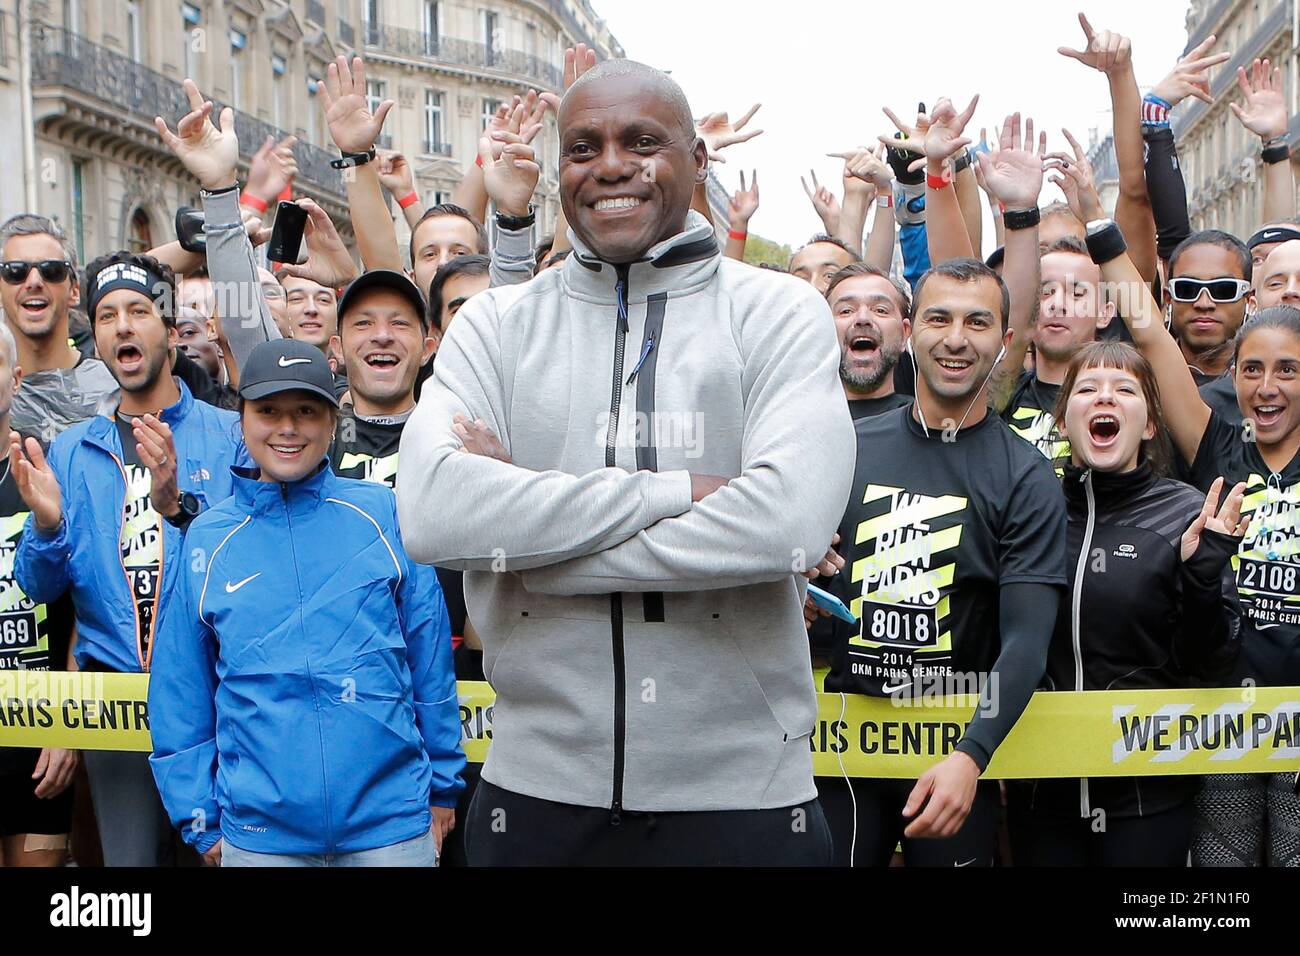 Carl Lewis (usa), ambassador of Nike, gives the start of the 11th edition  of the running race 10KM Paris Centre, in Paris, on October 05, 2014,  France, Europe - Photo Stephane Allaman /